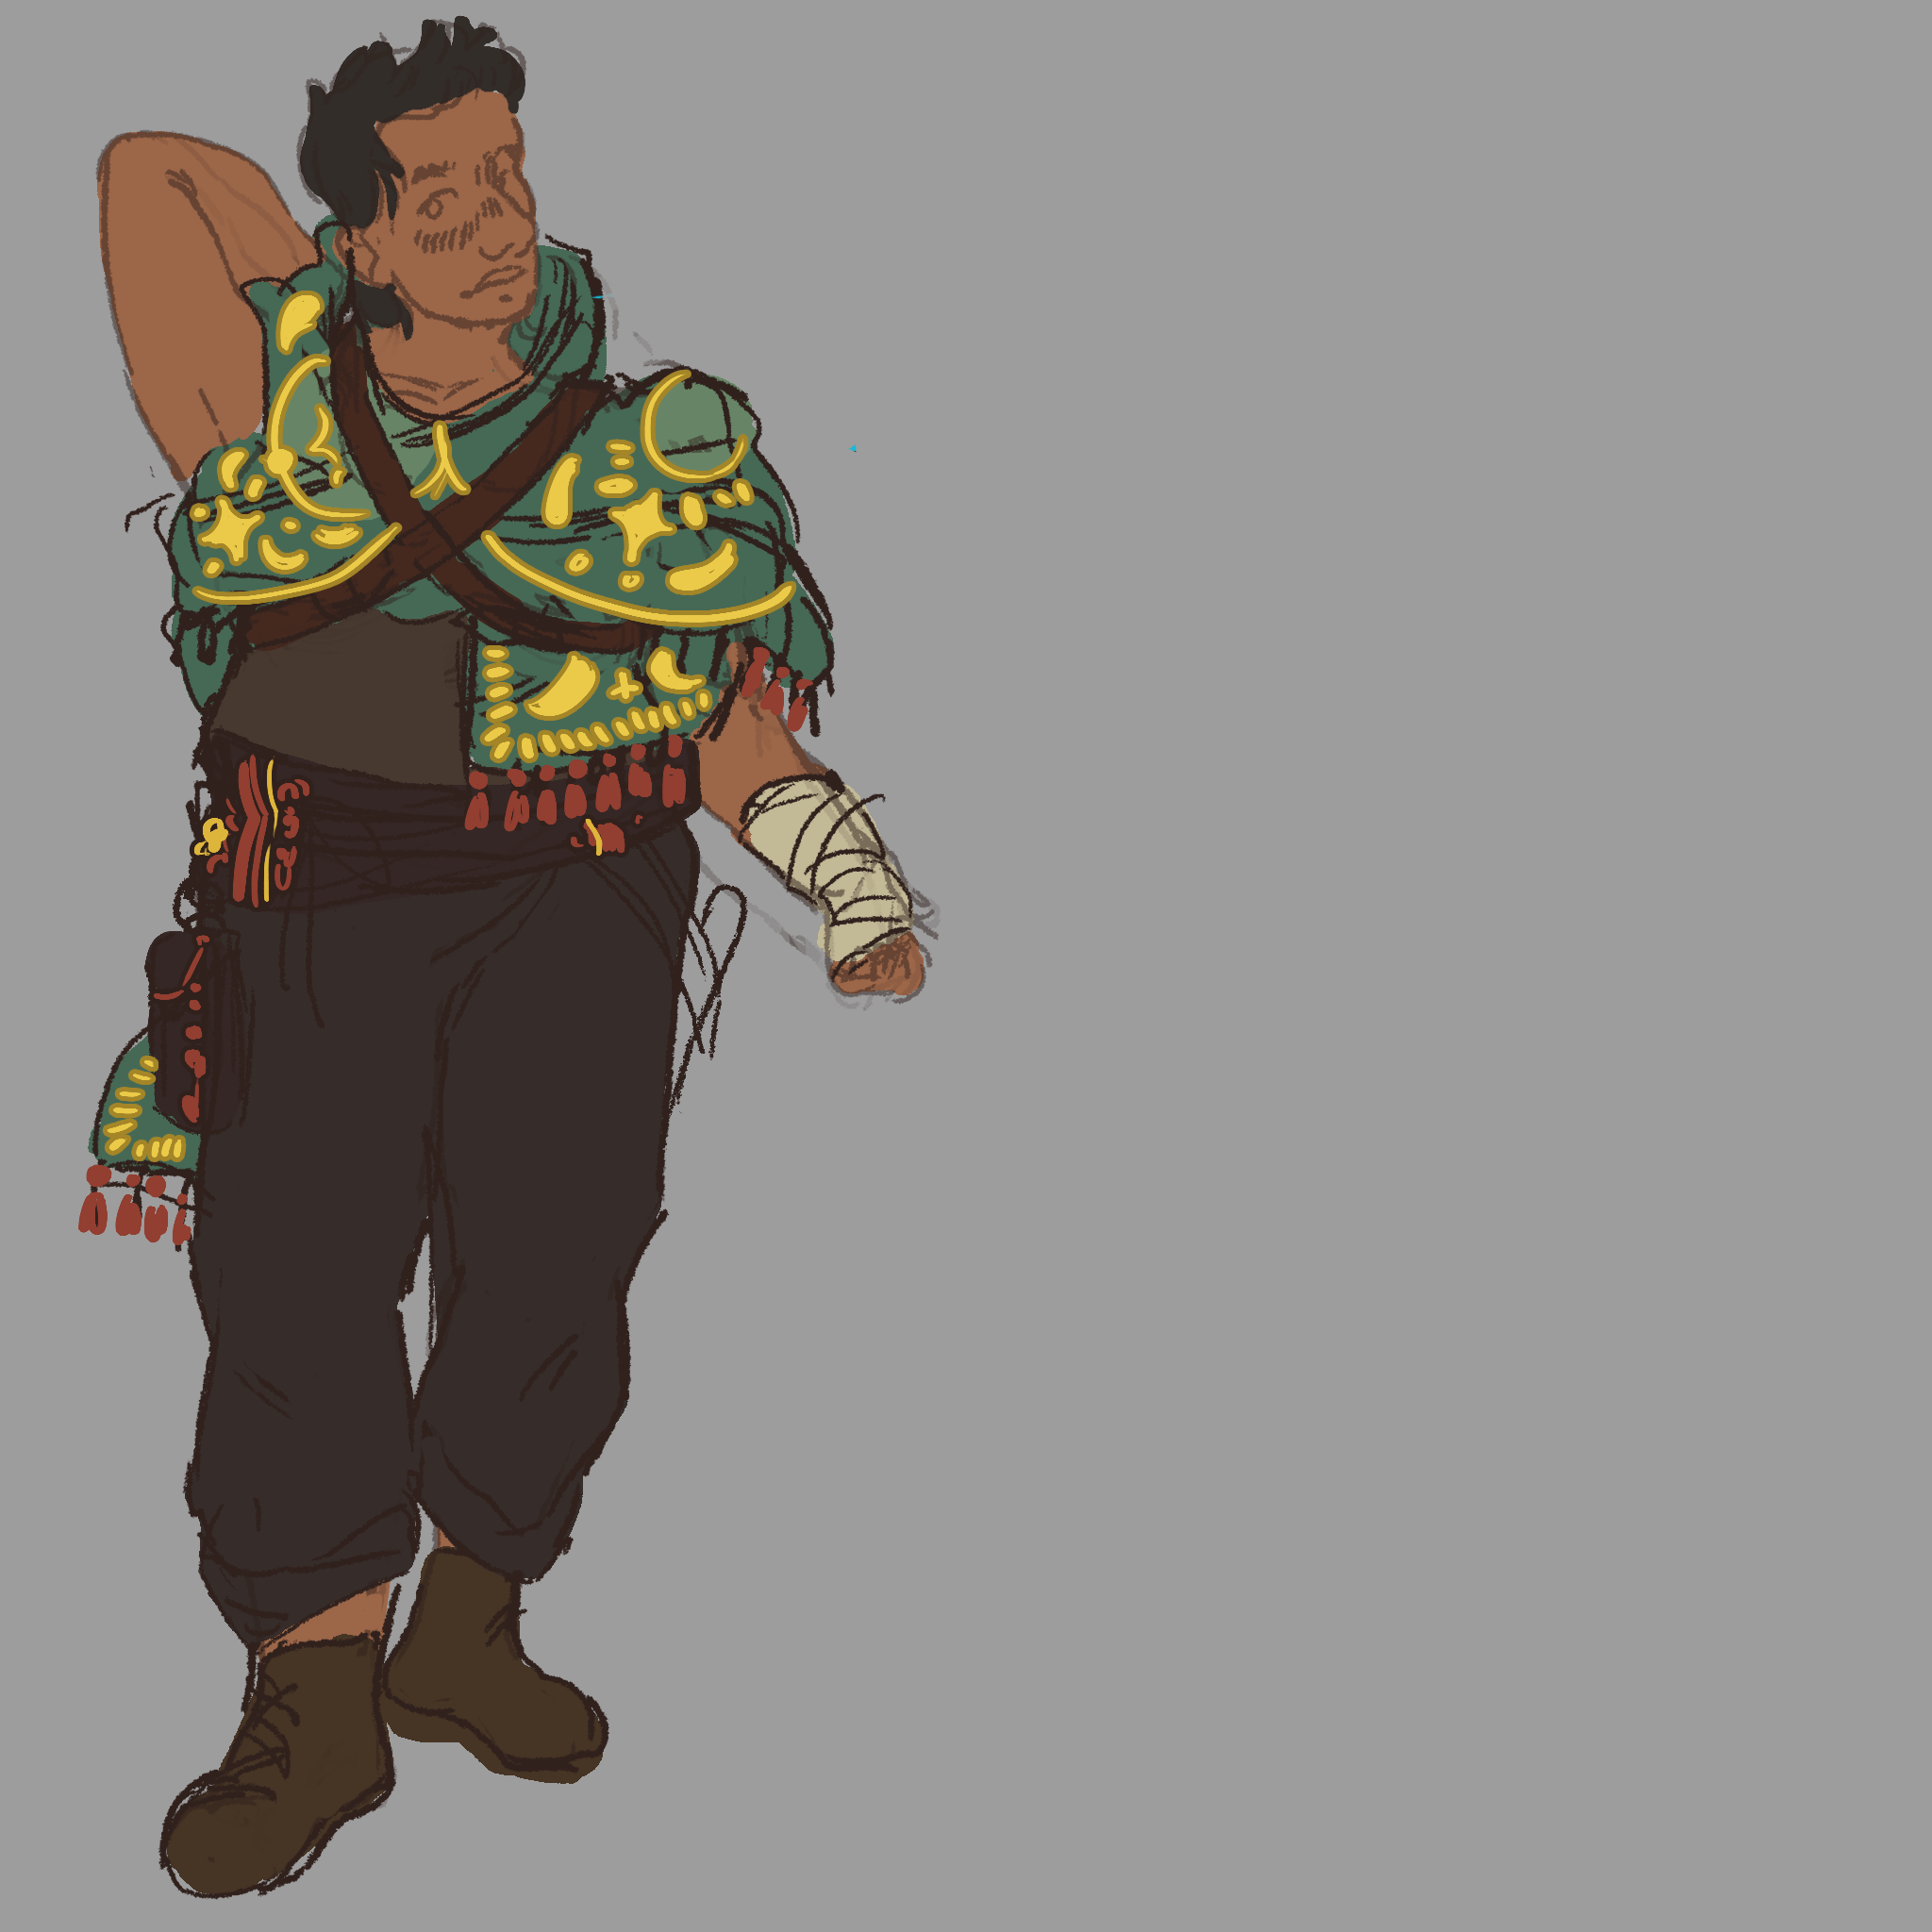 A full-body coloured sketch of Safiyyah, a young Brown woman with short dark hair, and a muscular, fat body. She's wearing work clothes with a shawl wrapped around her shoulders and secured by belts.